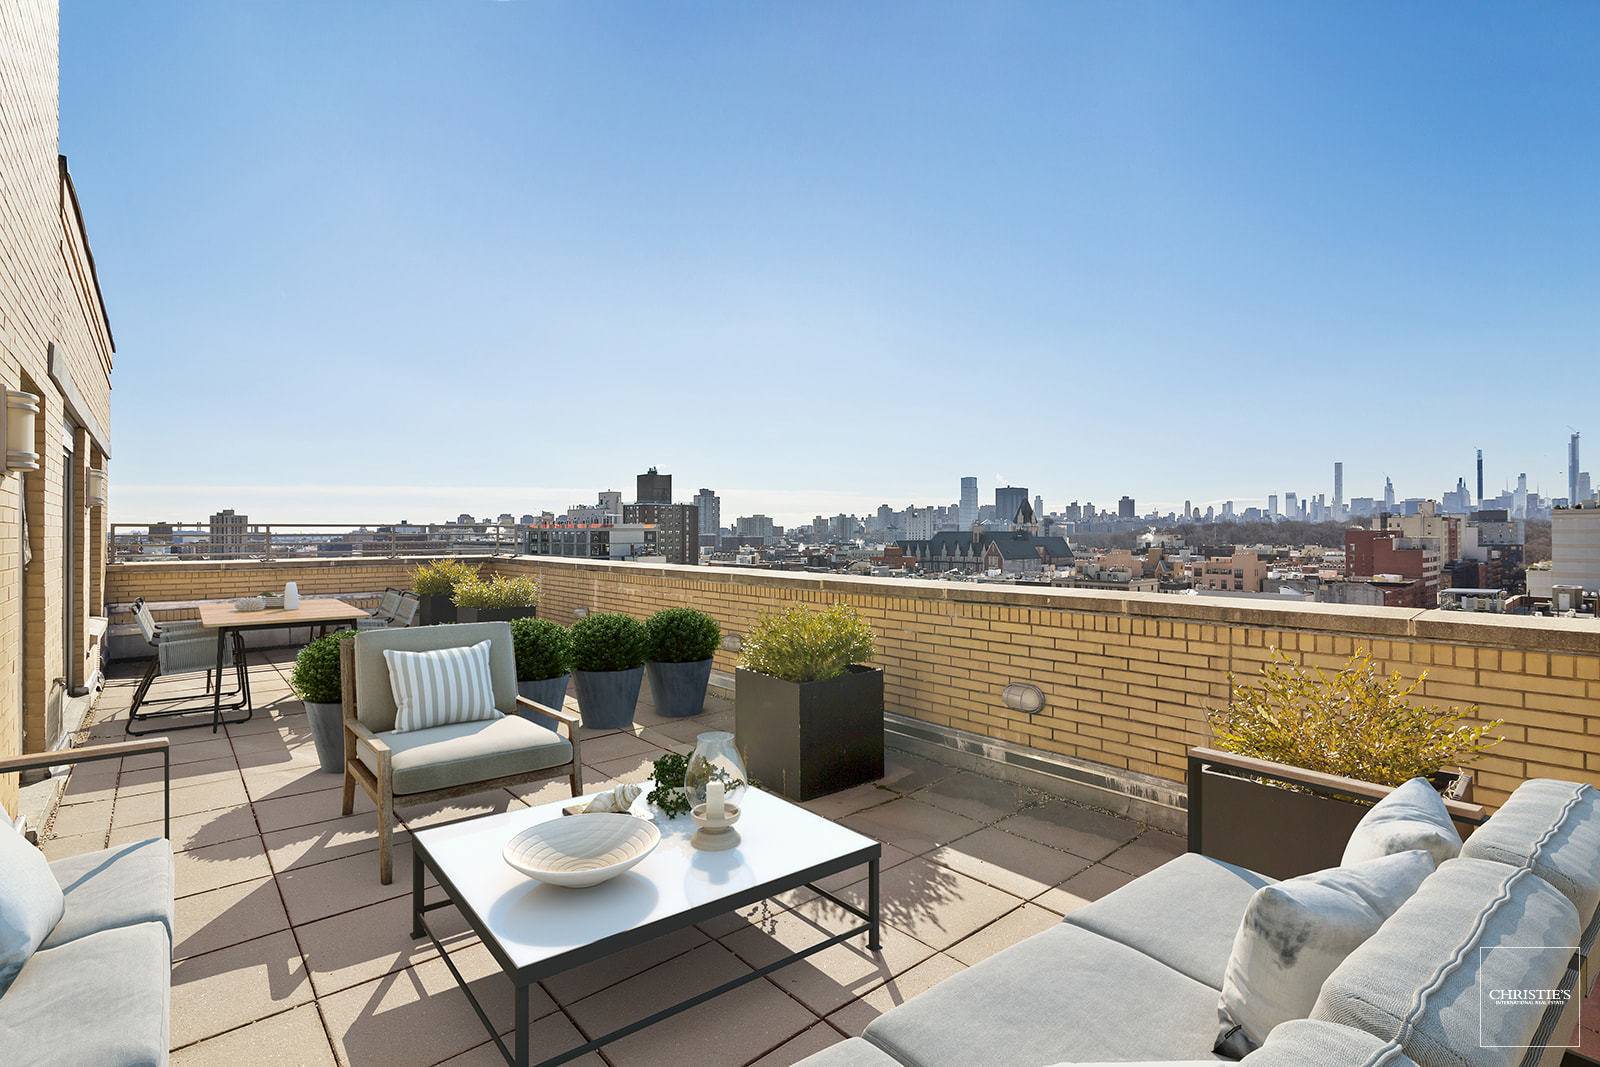 Re Introducing the sponsor sale of this fabulous SoHa 118 Penthouse Duplex apartment, distinguished by an incredible 3, 456 square feet of luxuriously appointed living space with multiple exposures, plus ...